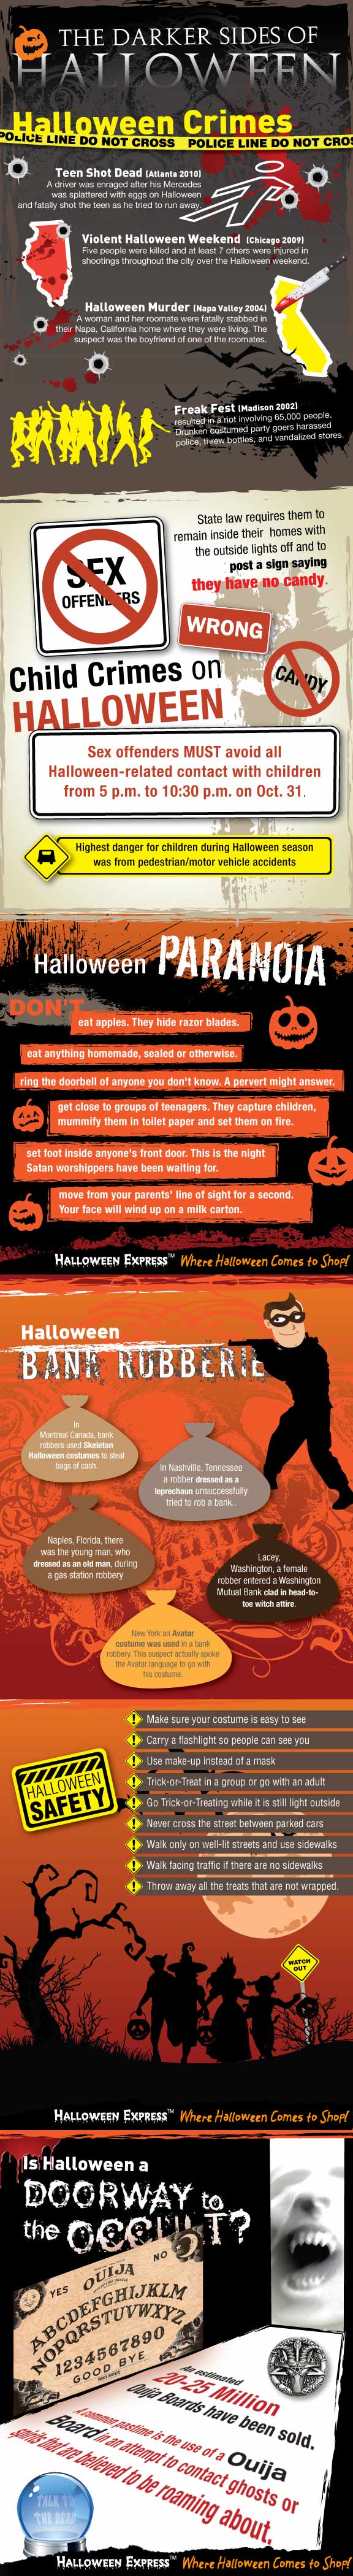 The Darker Side Of Halloween [Infographic]